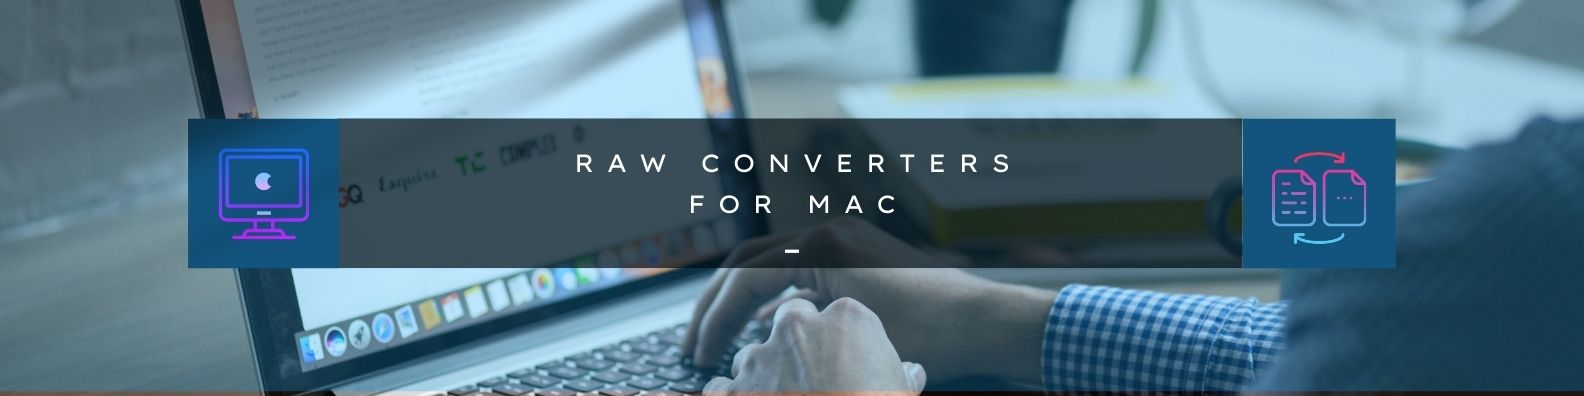 RAW Converters for Mac